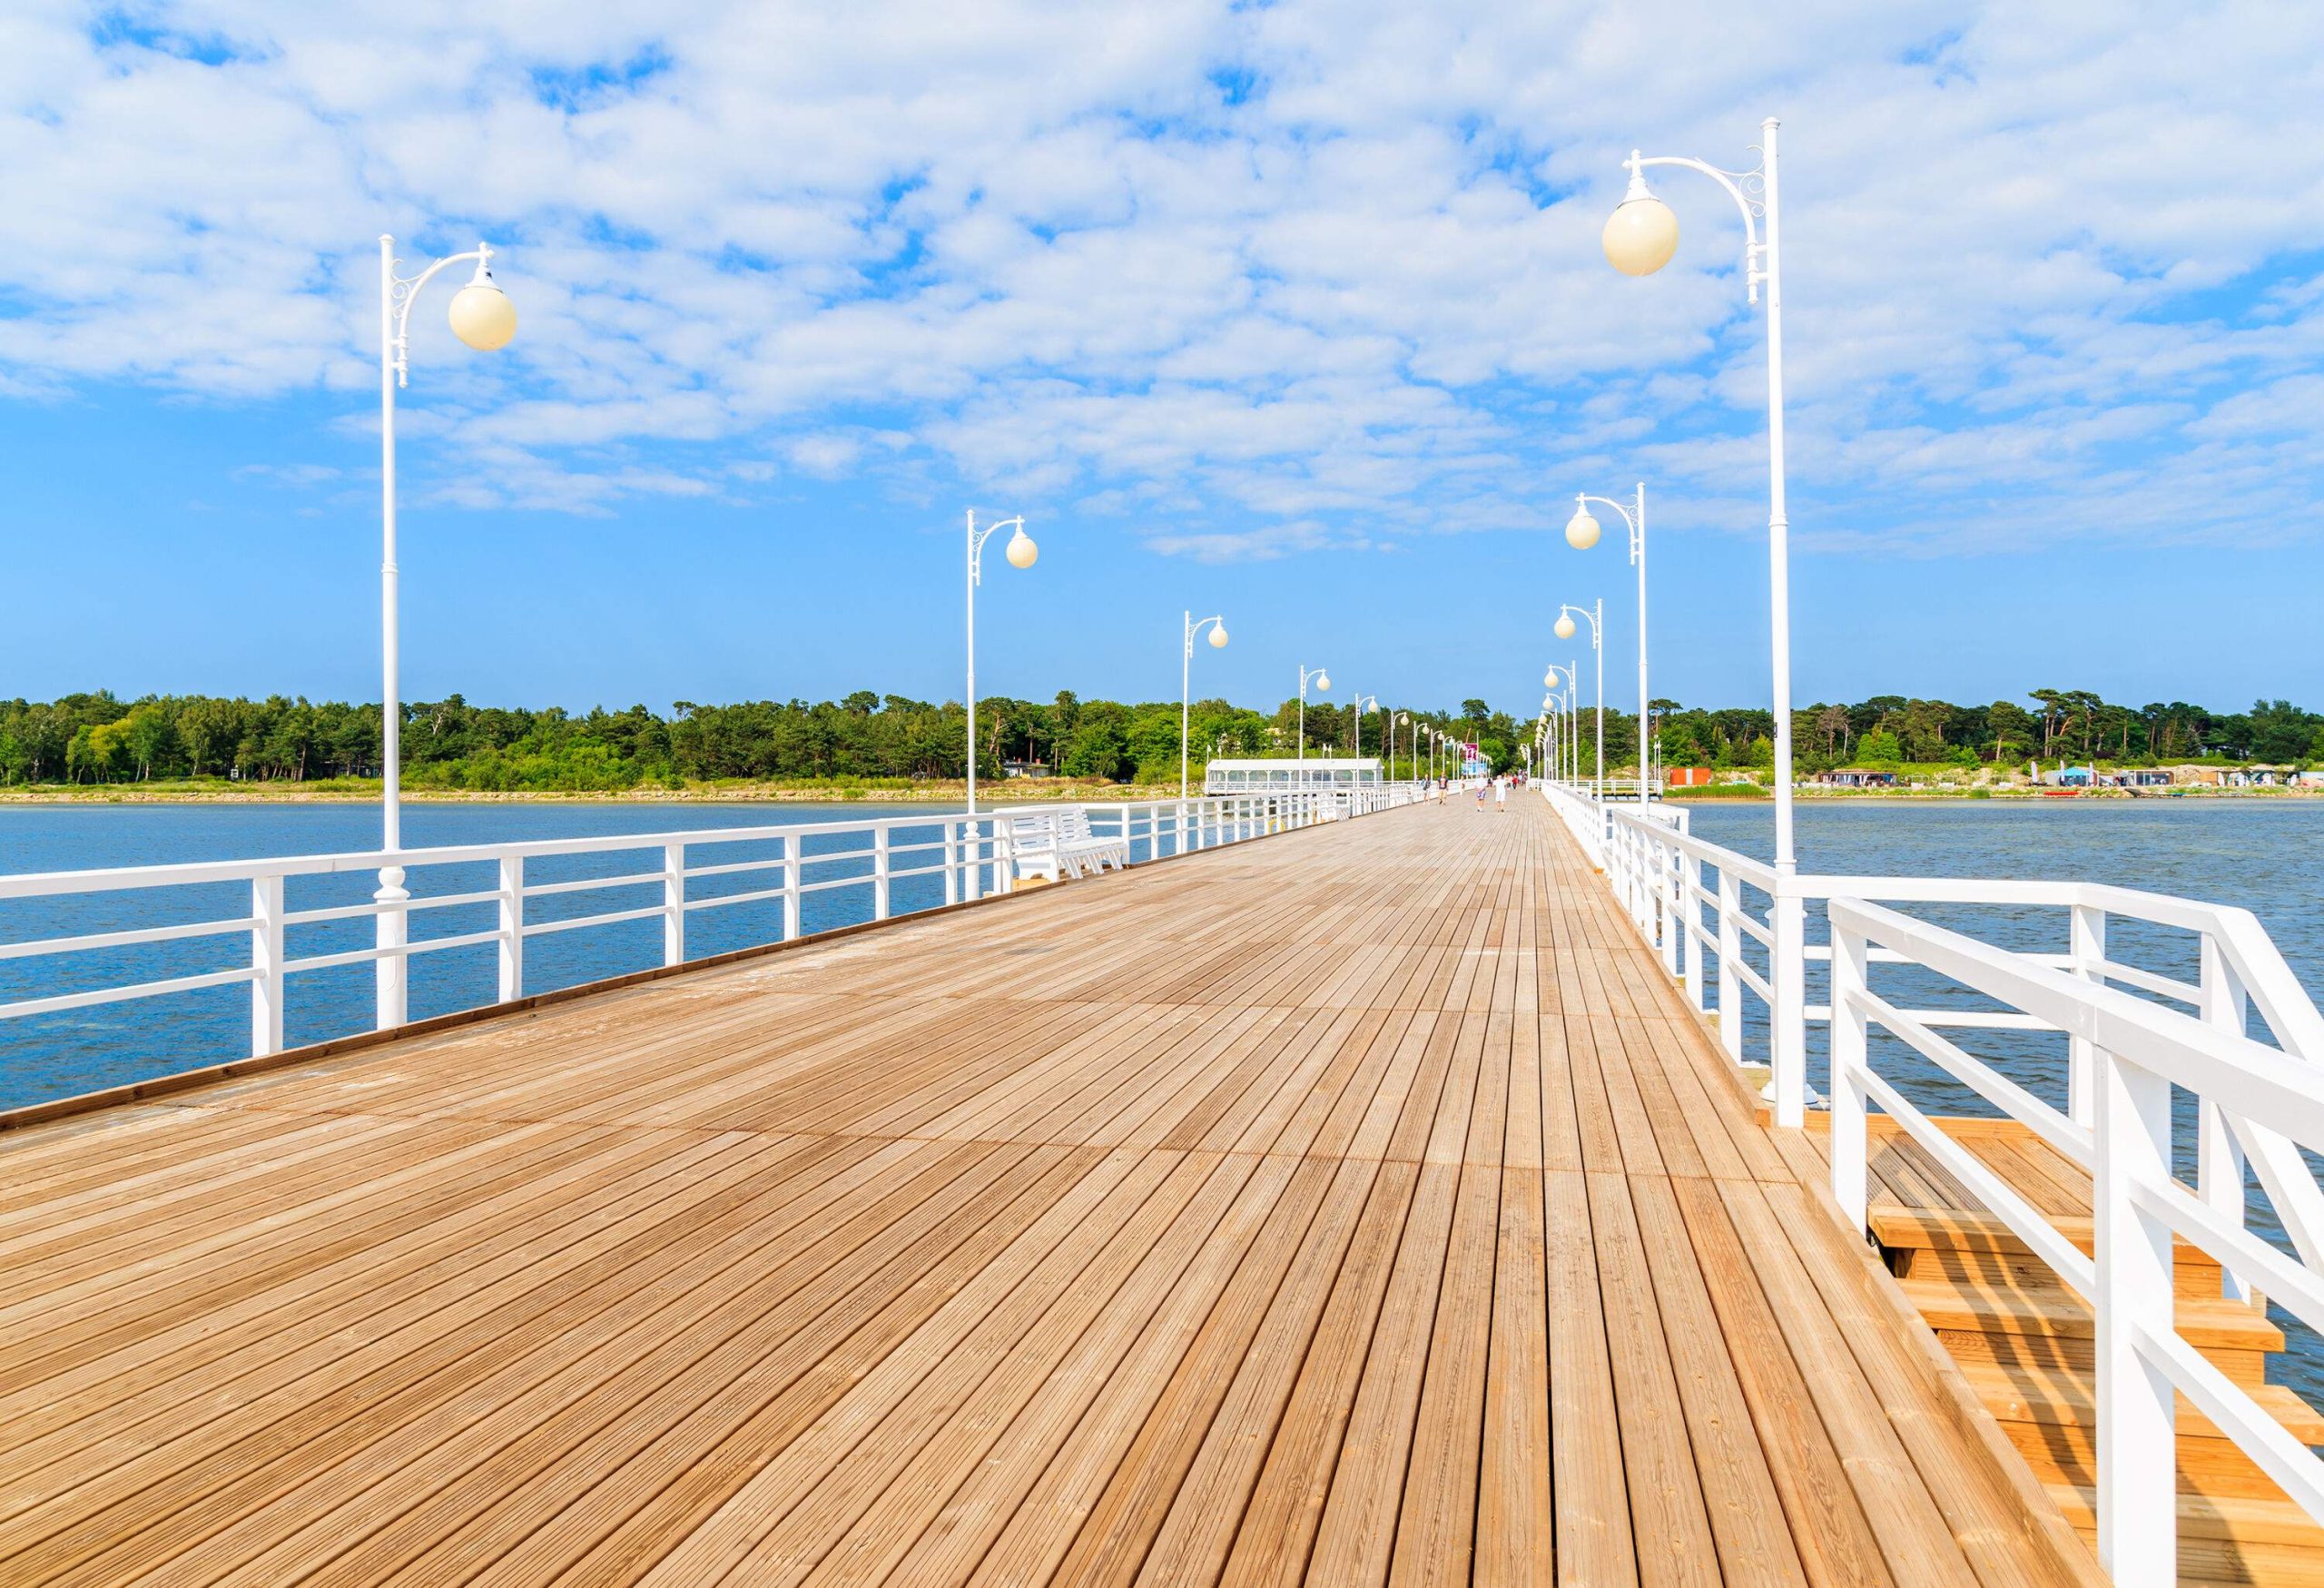 A wooden pier lined with streetlamps across the sea.